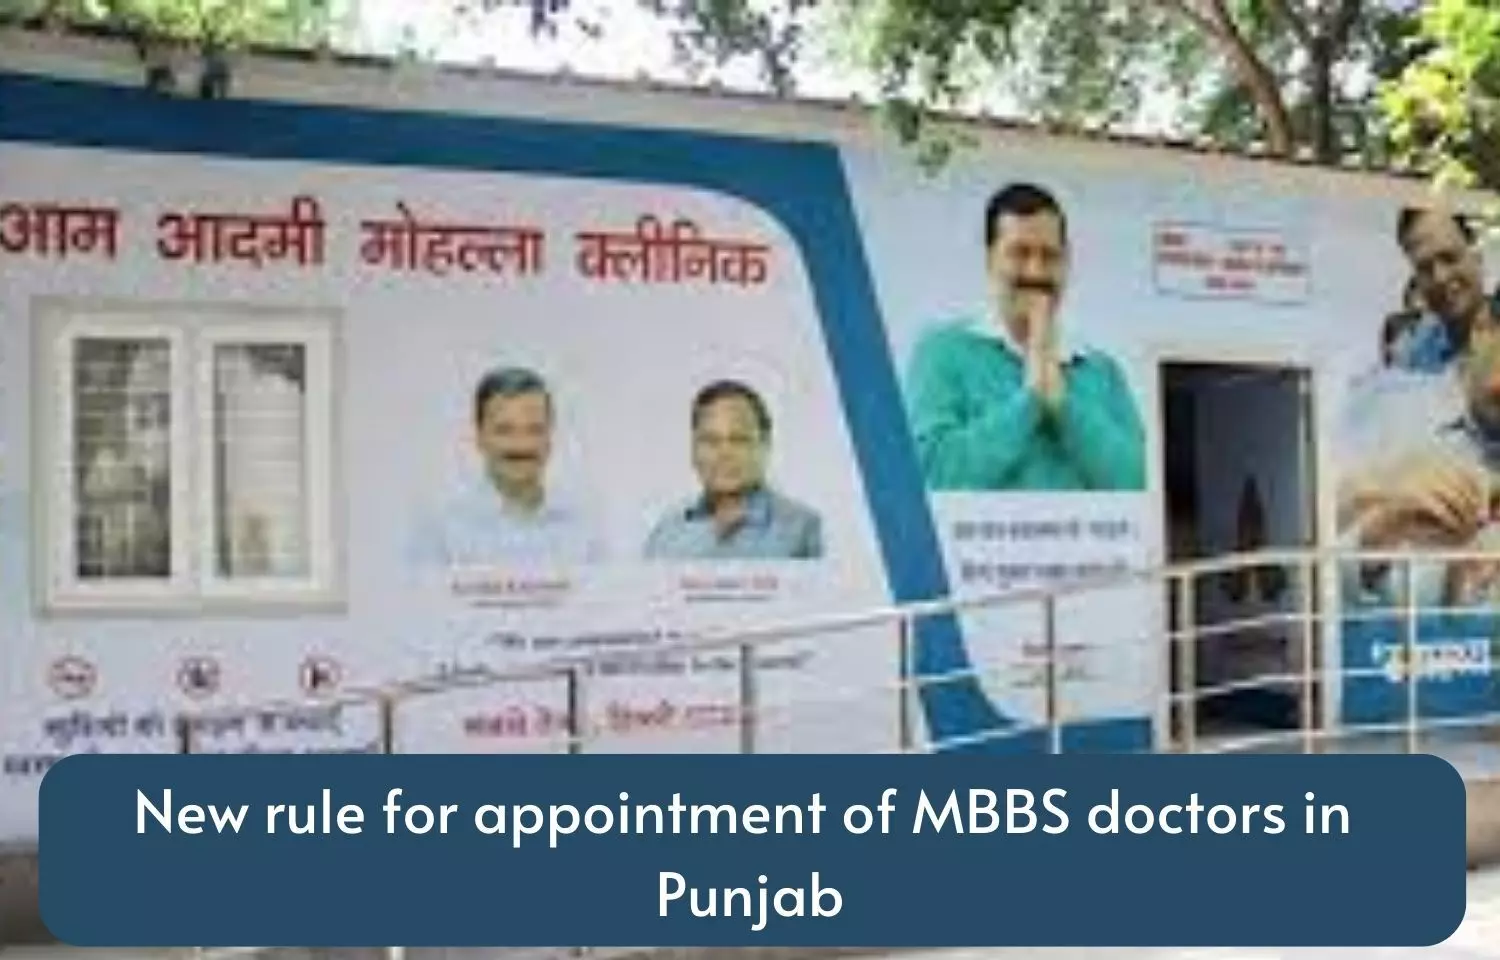 MBBS doctors in Punjab to be posted at hospitals only after 2-3 years of duty at Mohalla Clinic